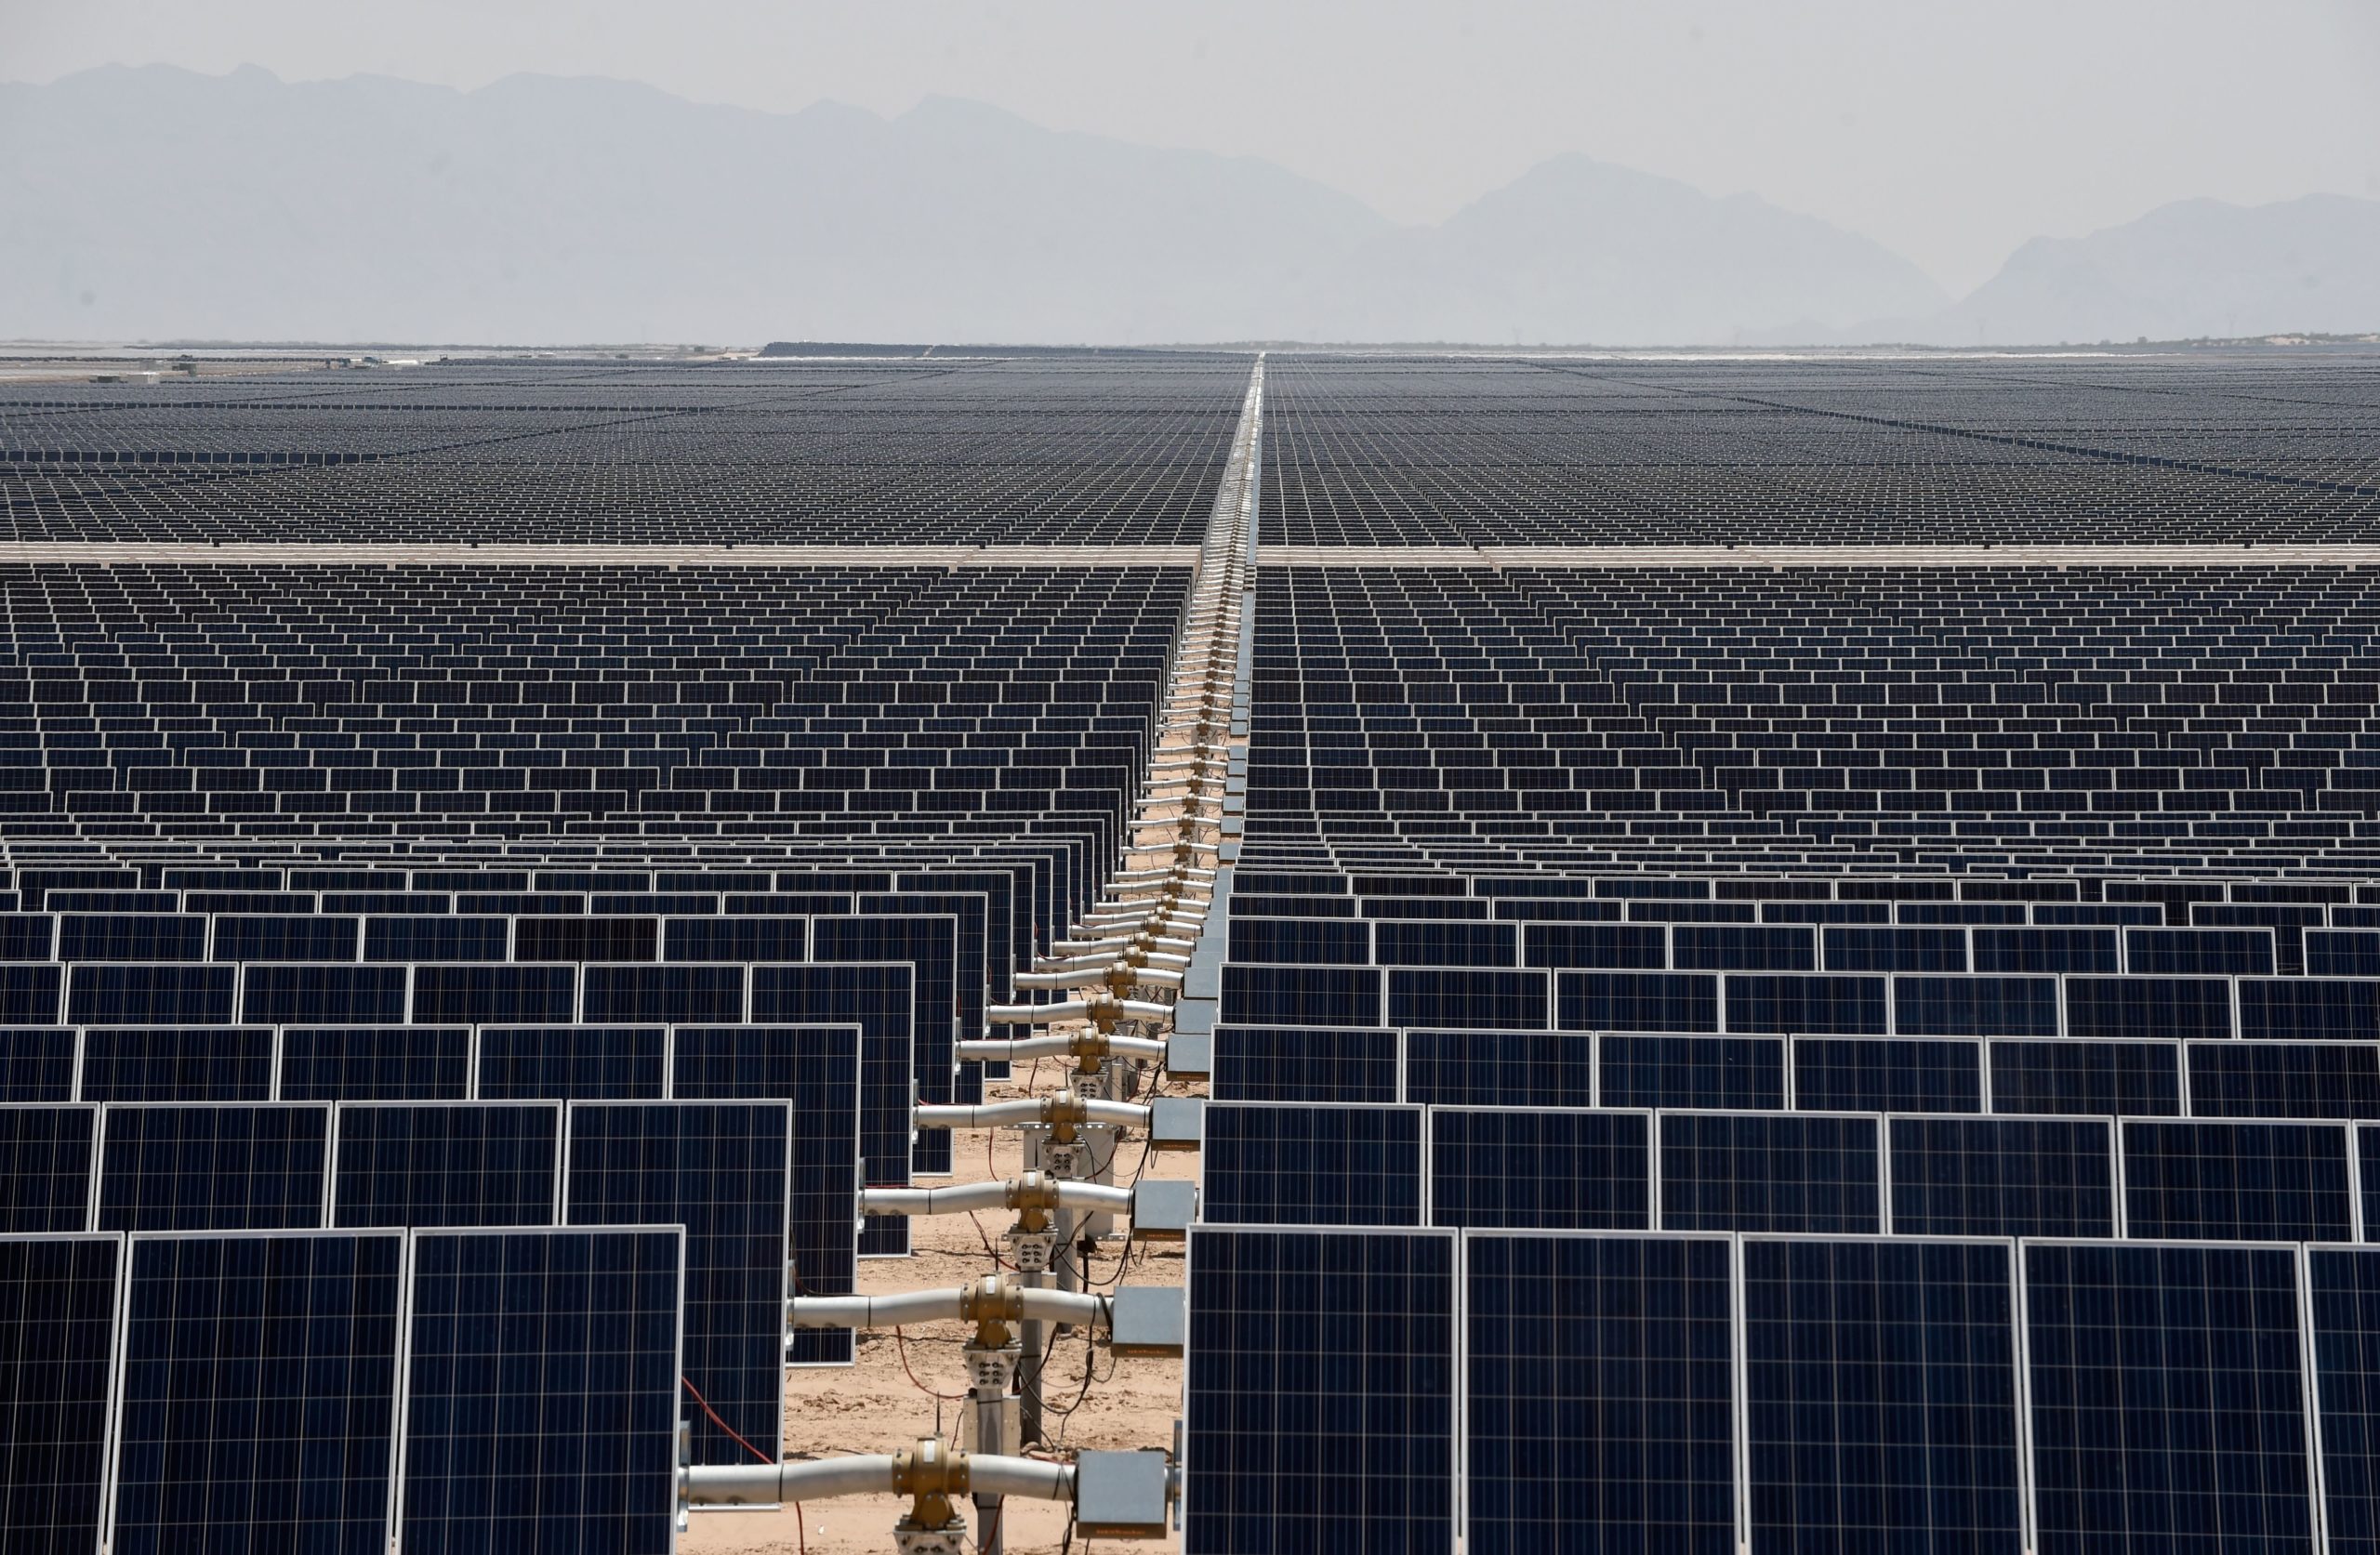 A solar power plant in Mexico is pictured in 2018. (Alfredo Estrella/AFP via Getty Images)